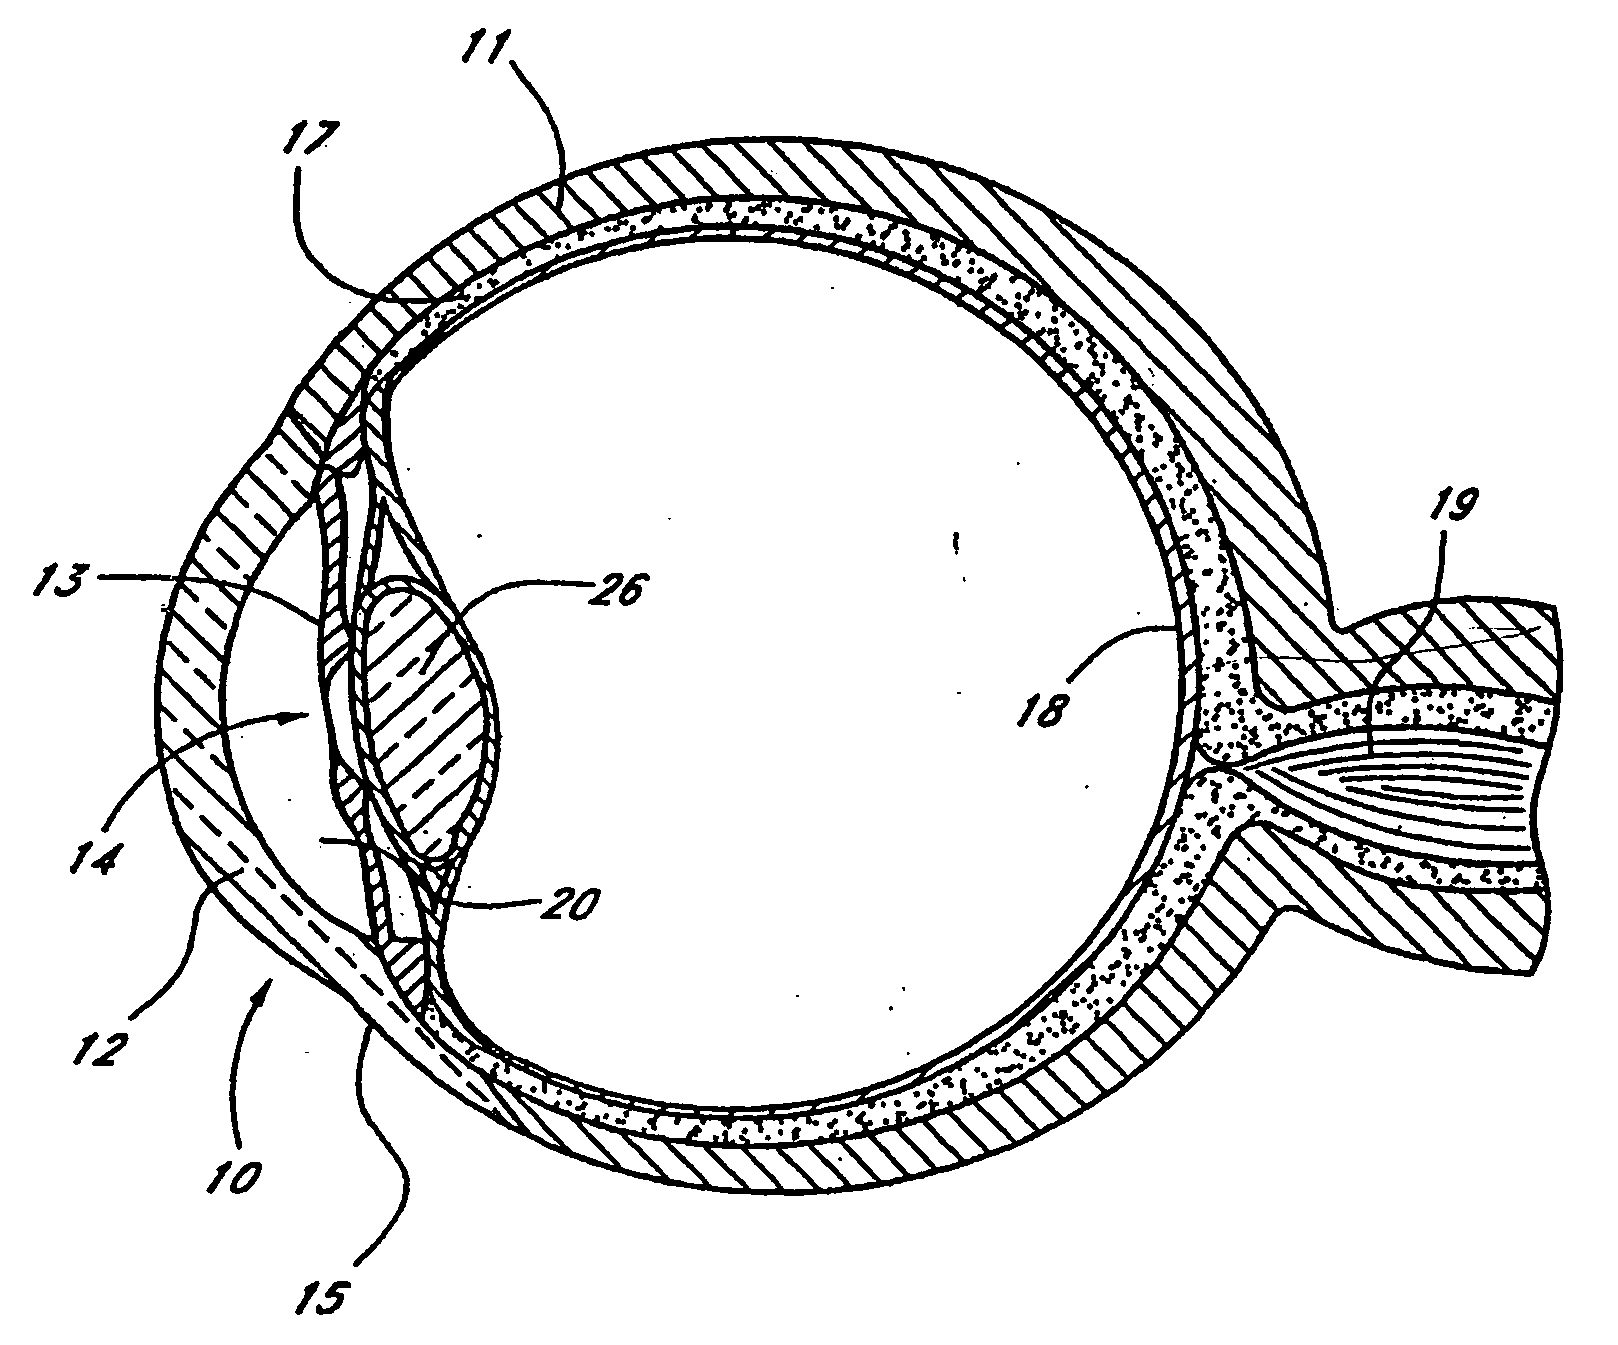 Glaucoma implant with therapeutic agents